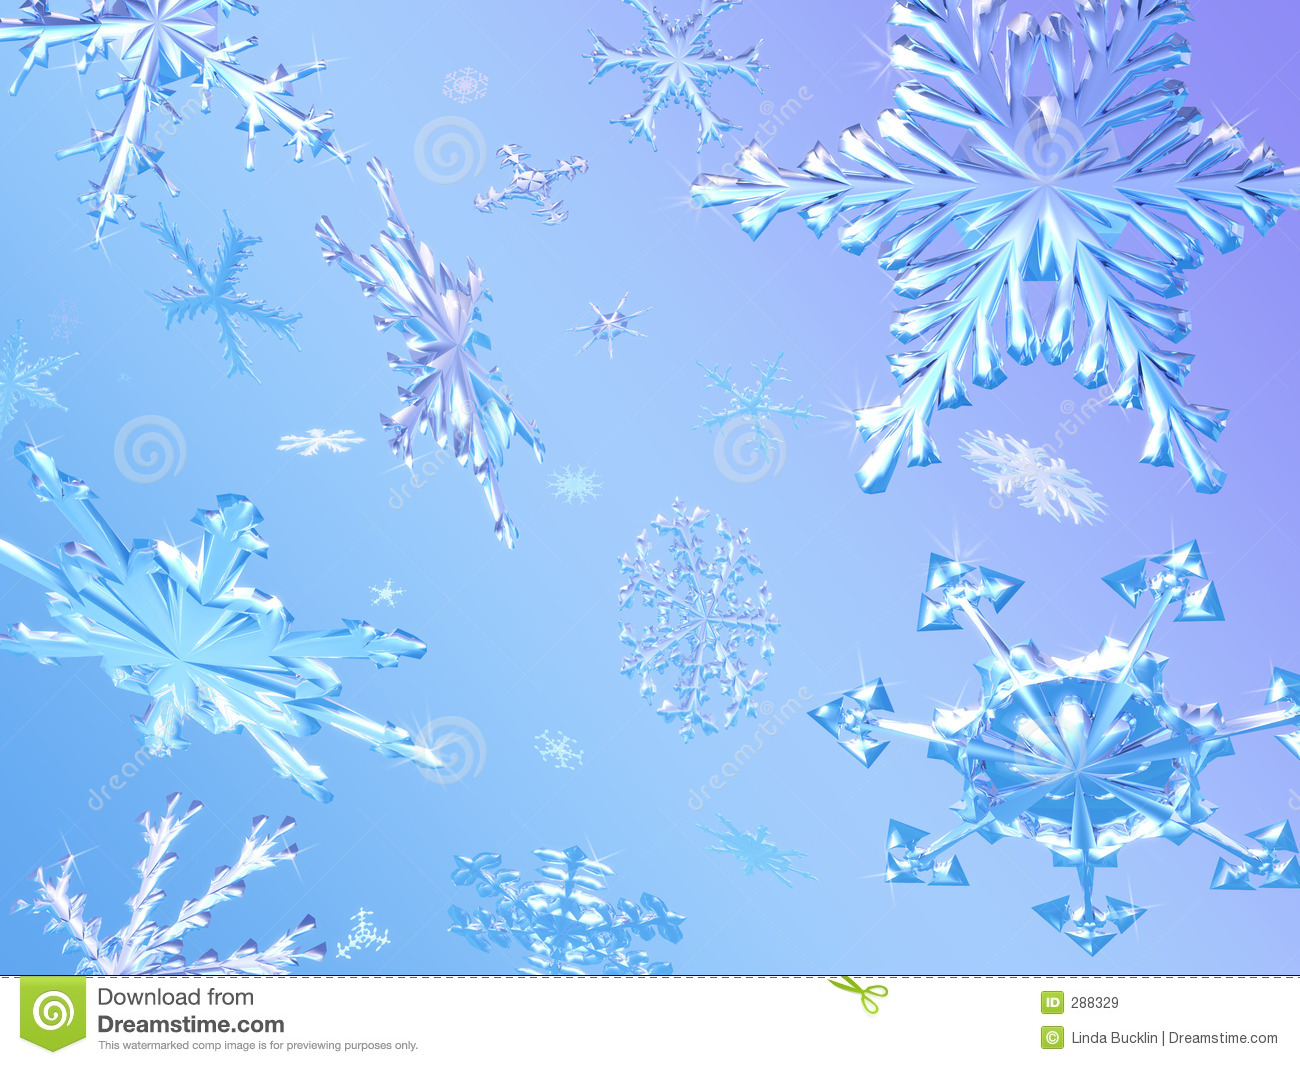 Snowflakes Falling Royalty Free Stock Images   Image  288329